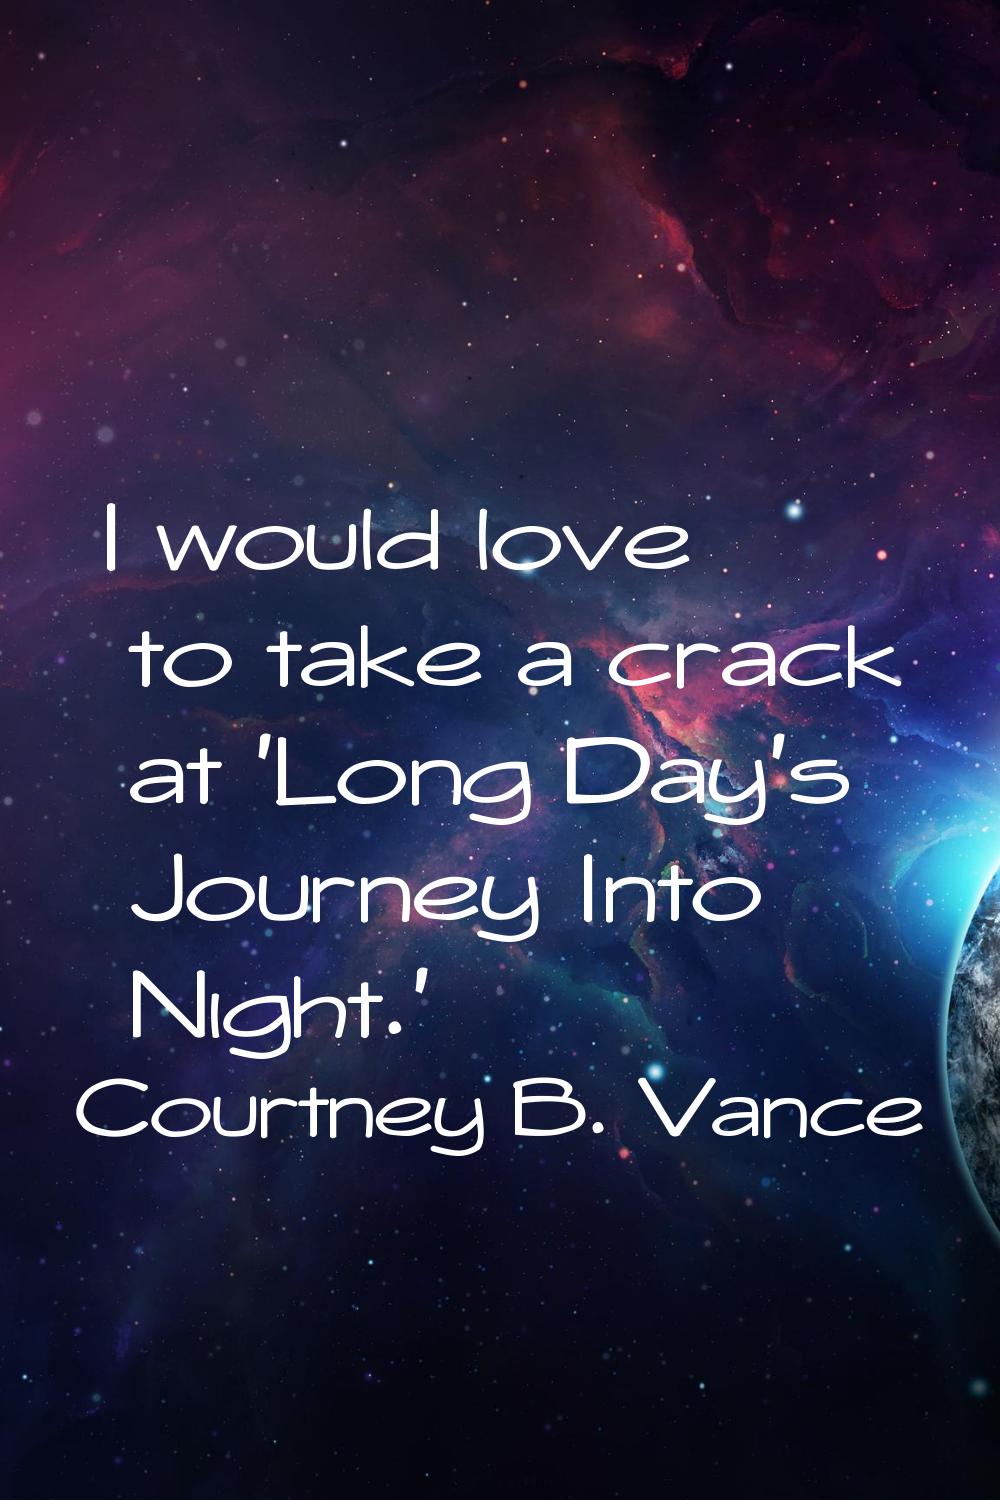 I would love to take a crack at 'Long Day's Journey Into Night.'